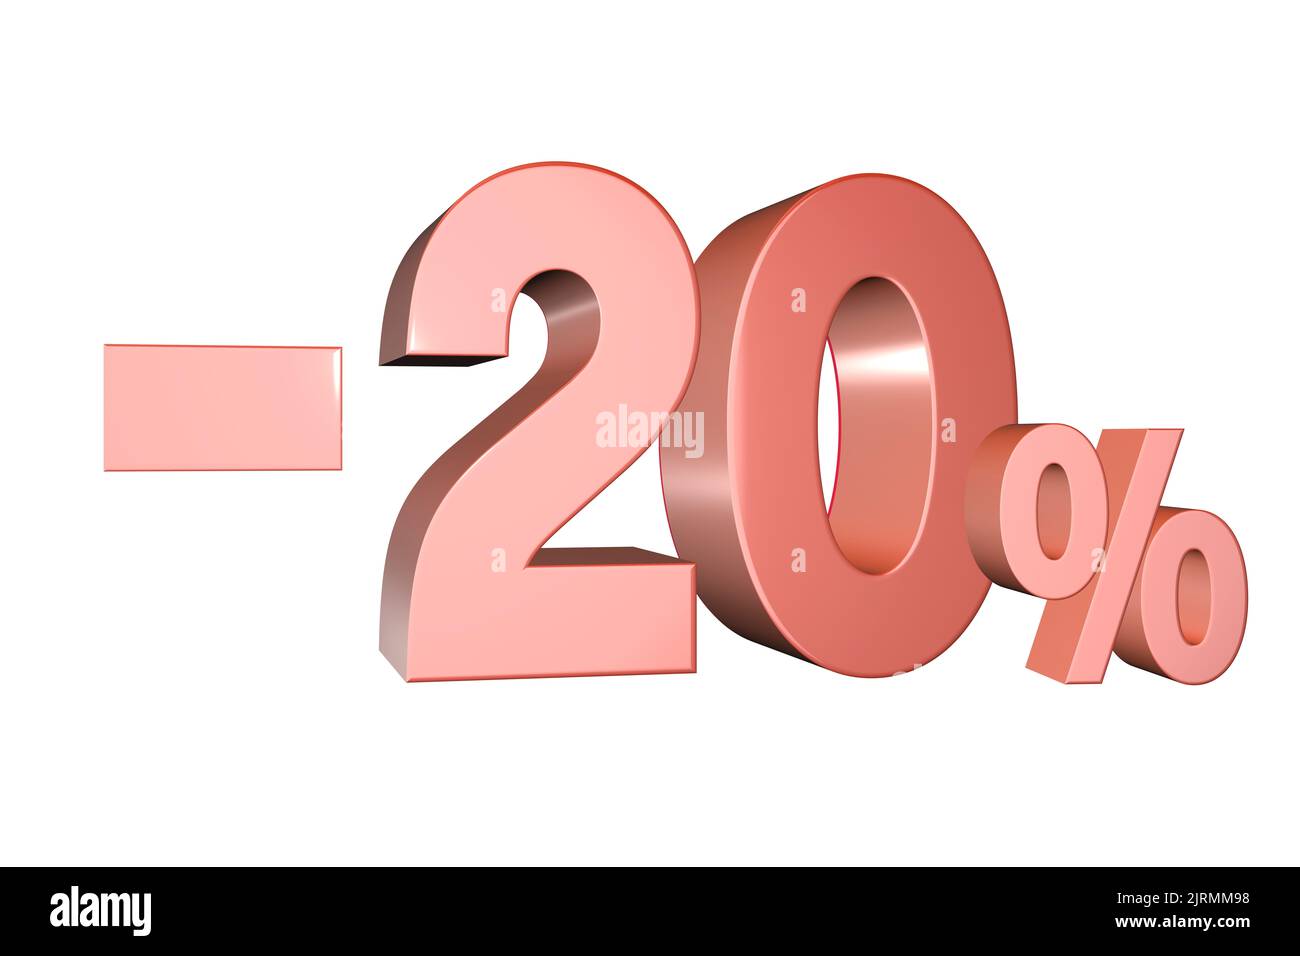 3D rendered discount banner marketing sign showing minus - 20% percent off Stock Photo